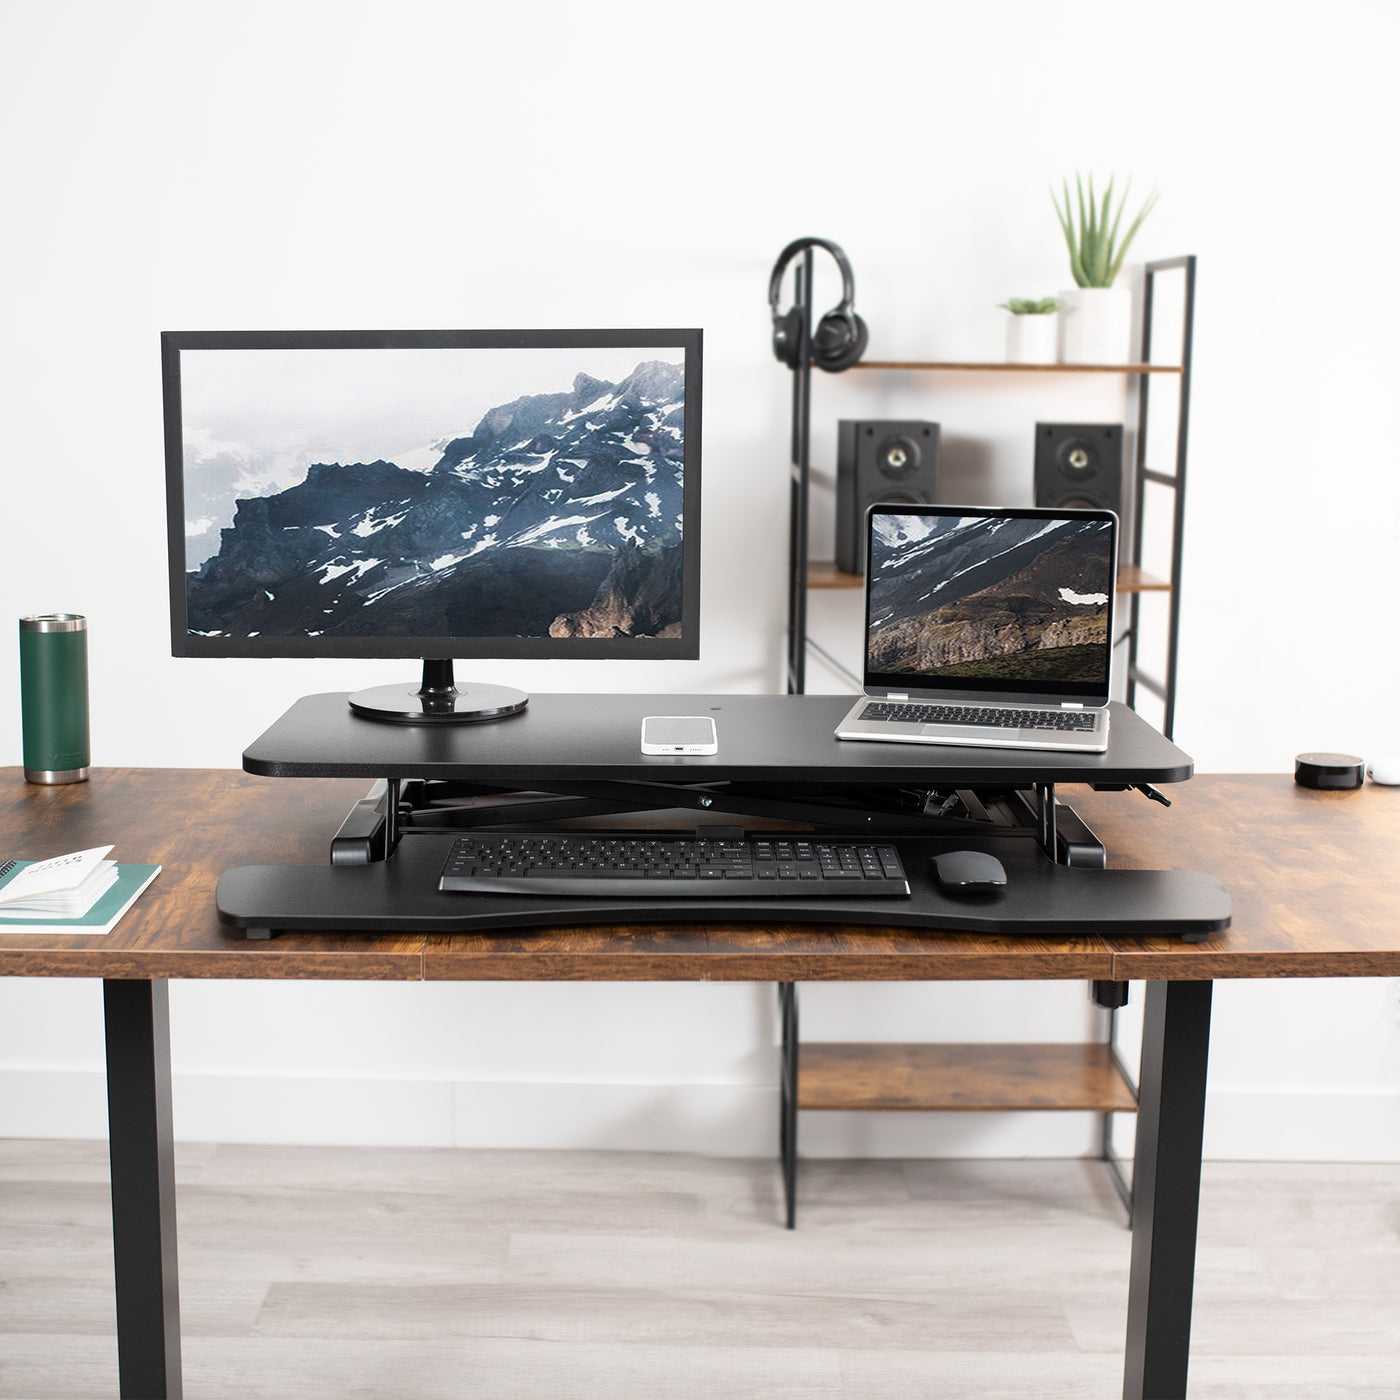 Lowered desk converter and desk top level for the convenience of working while sitting.